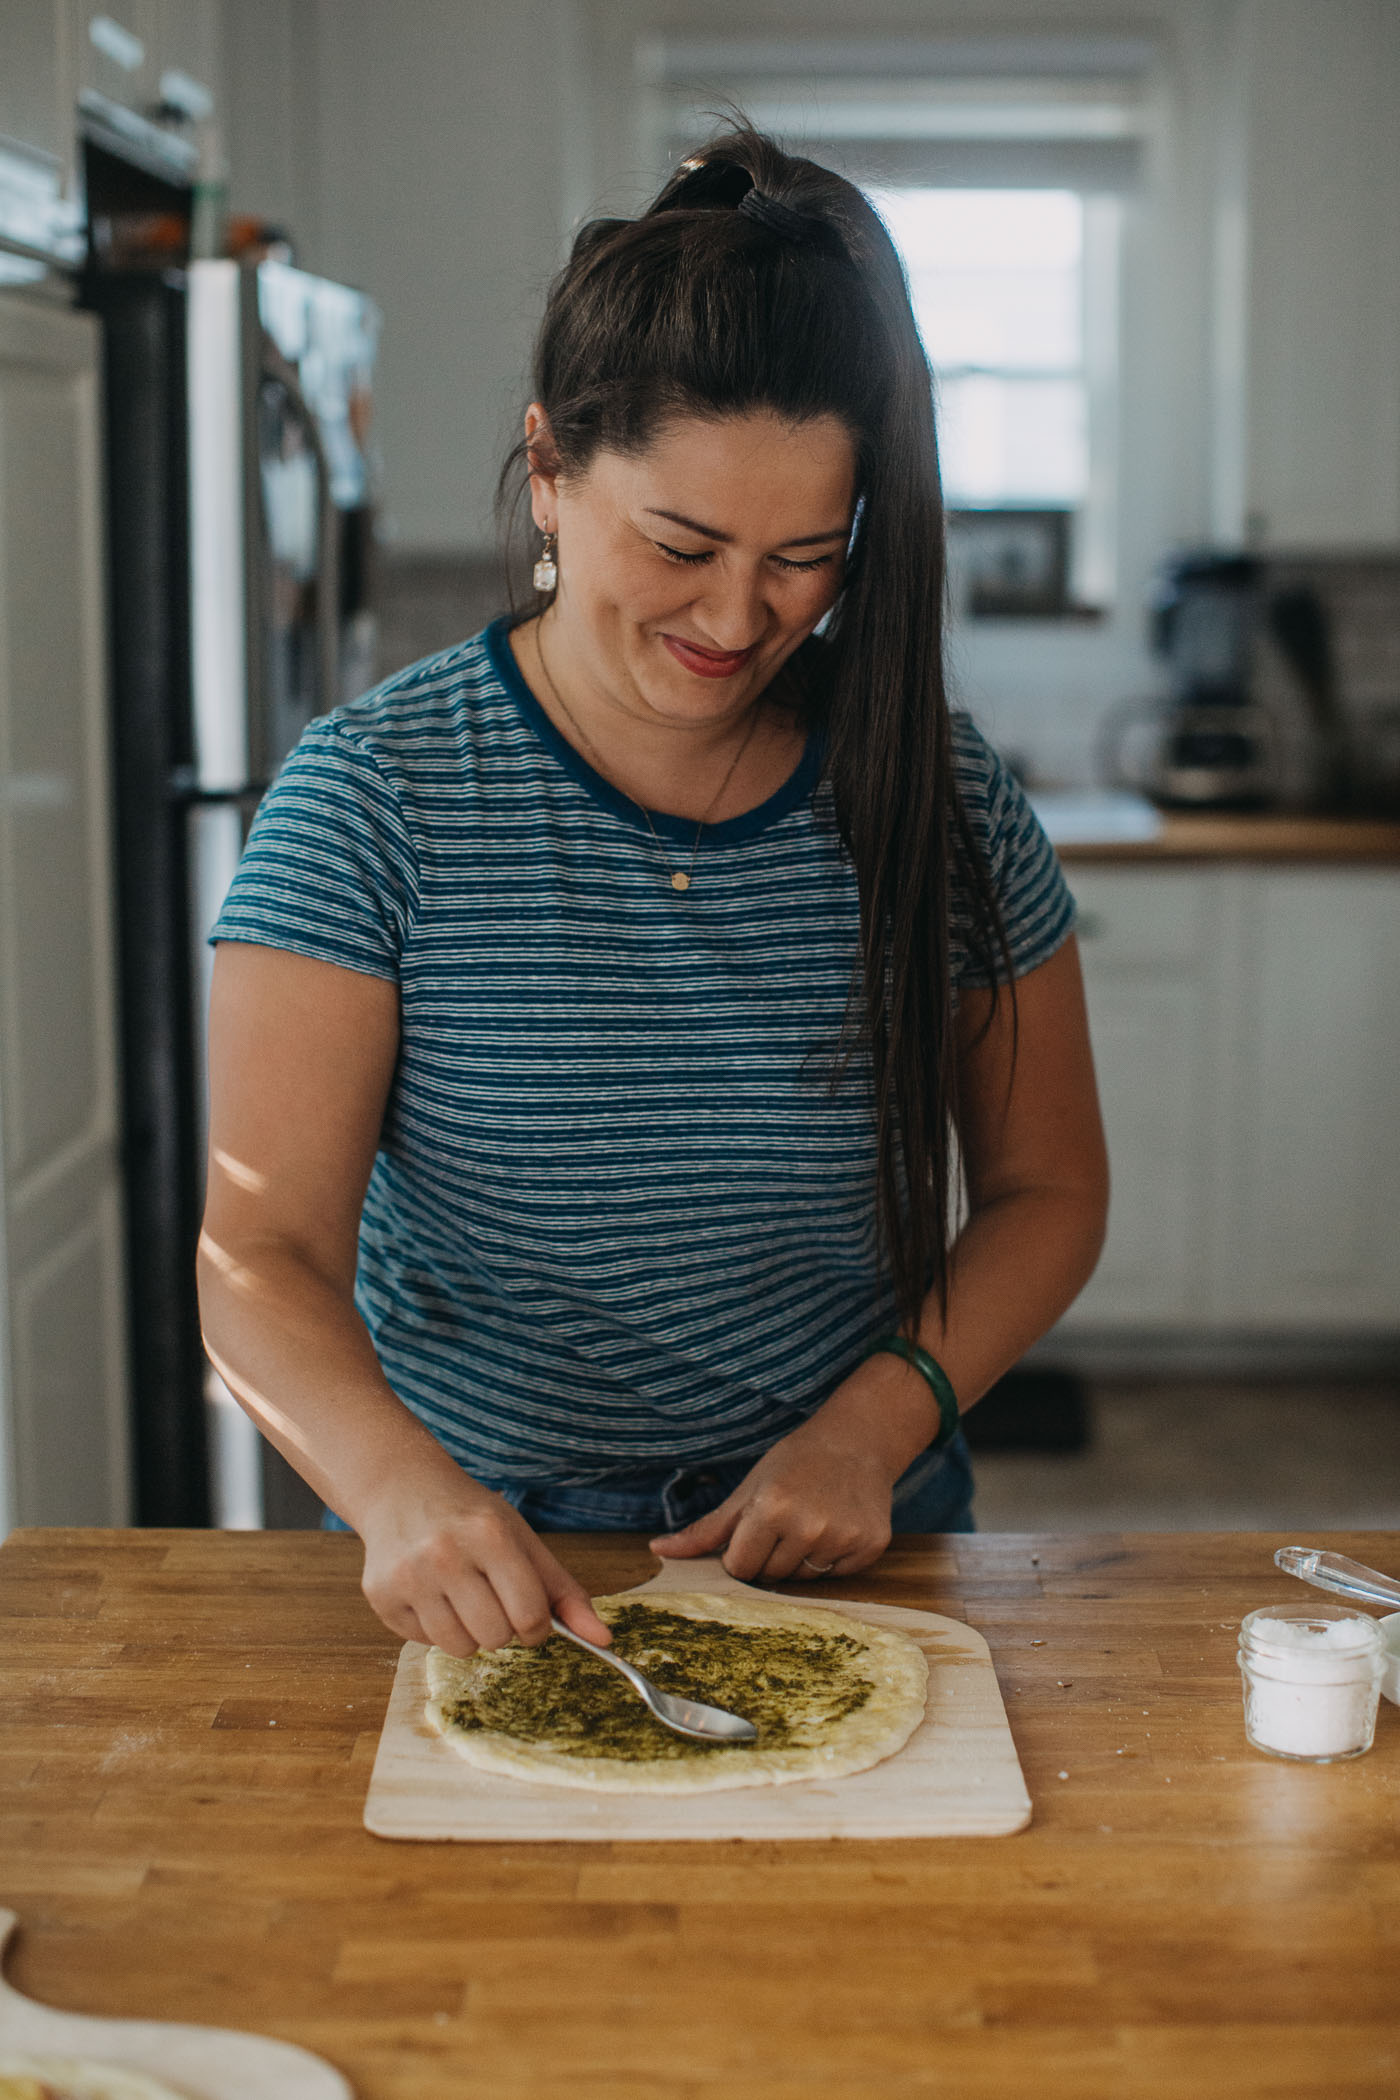 woman in blue shirt showing how to make homemade pizza for pizza night by spreading fresh pesto on pizza crust.